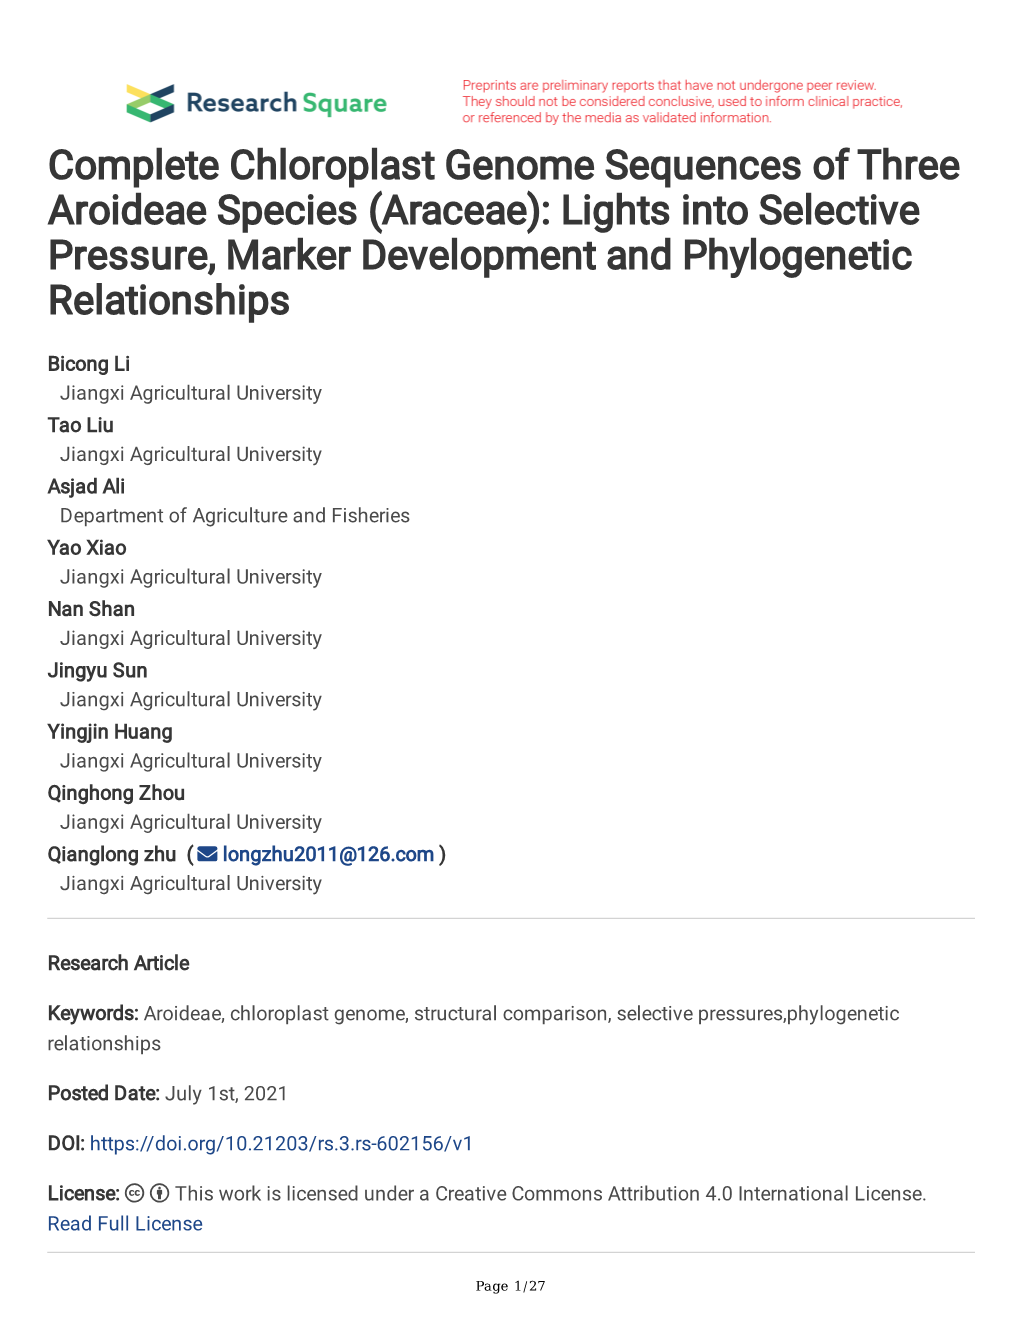 Complete Chloroplast Genome Sequences of Three Aroideae Species (Araceae): Lights Into Selective Pressure, Marker Development and Phylogenetic Relationships